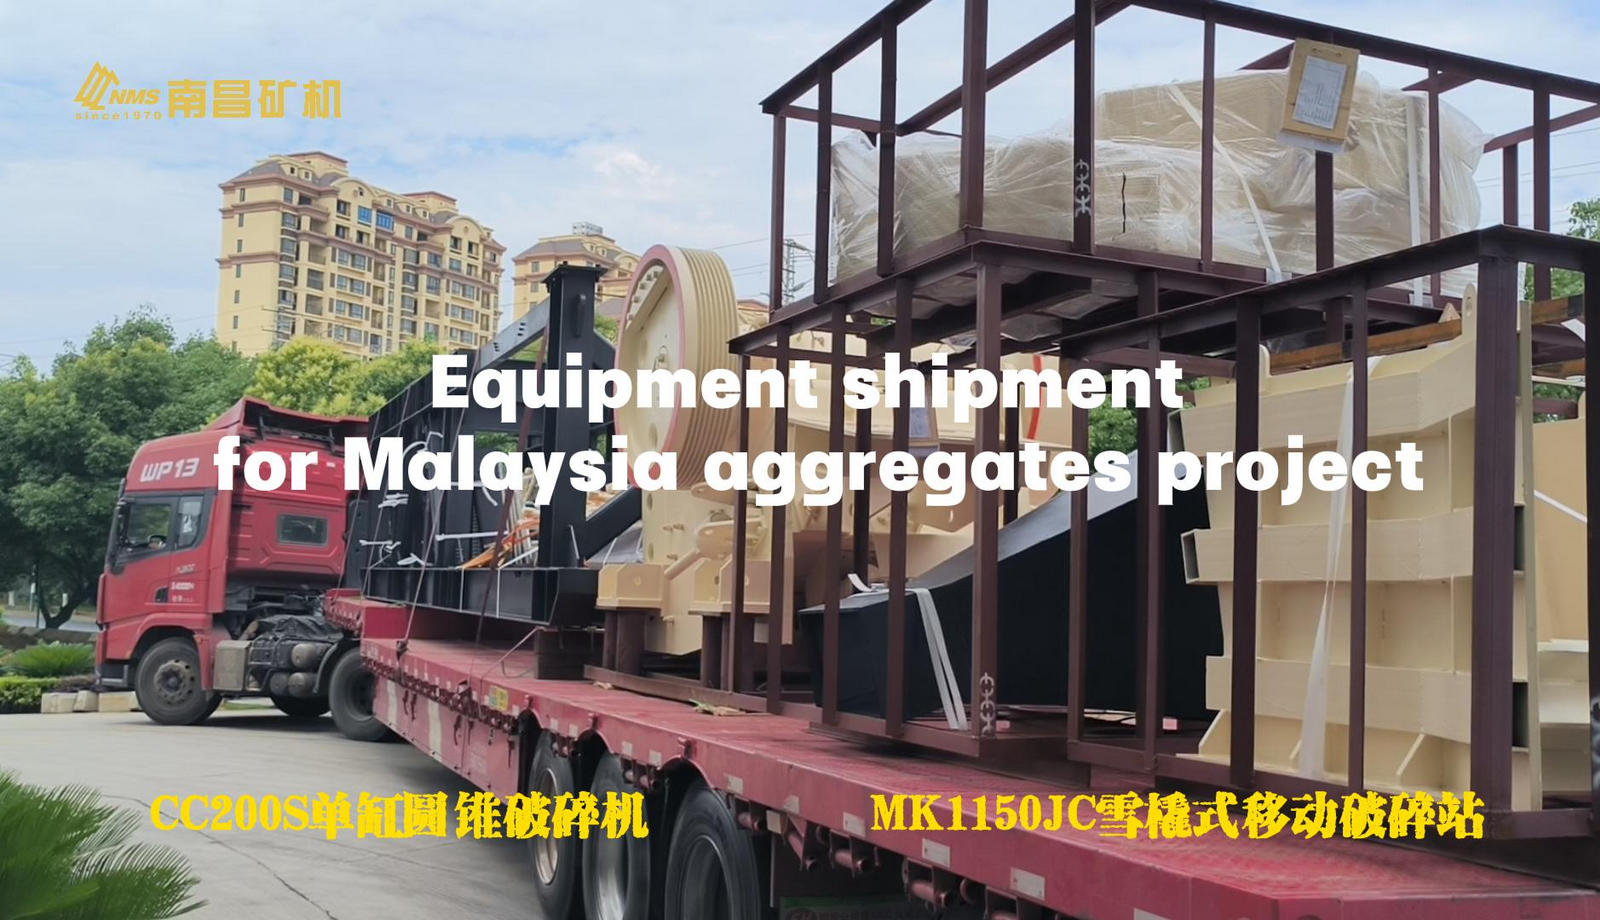 Equipment shipment for Malaysia aggregates project